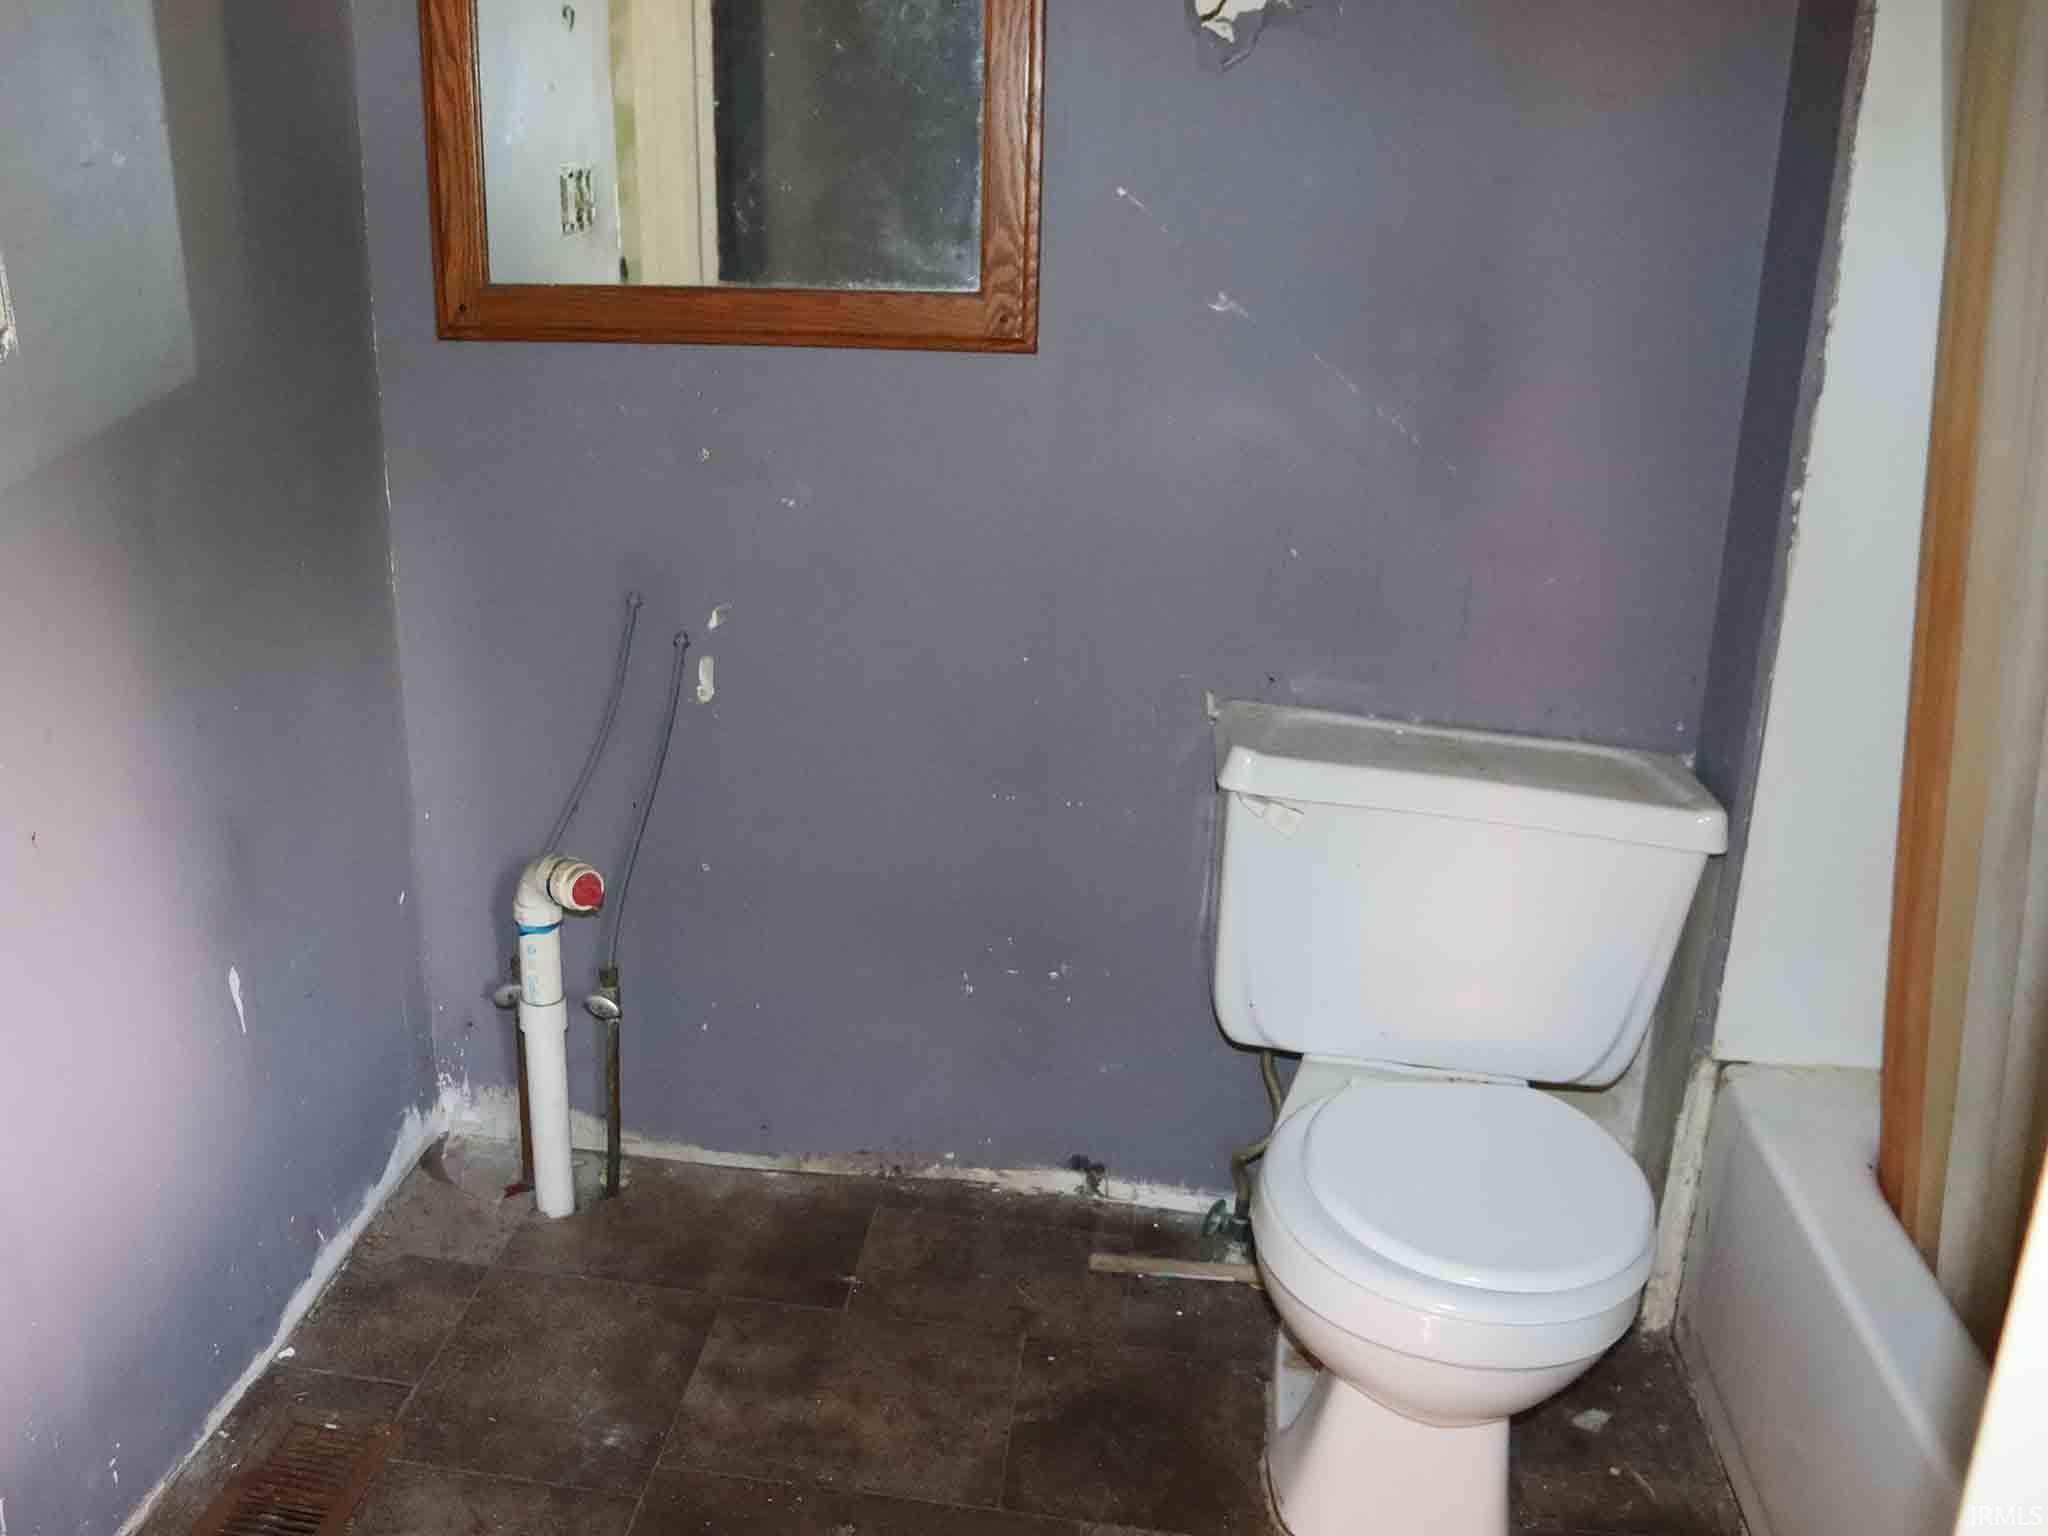 Bathroom from entry.